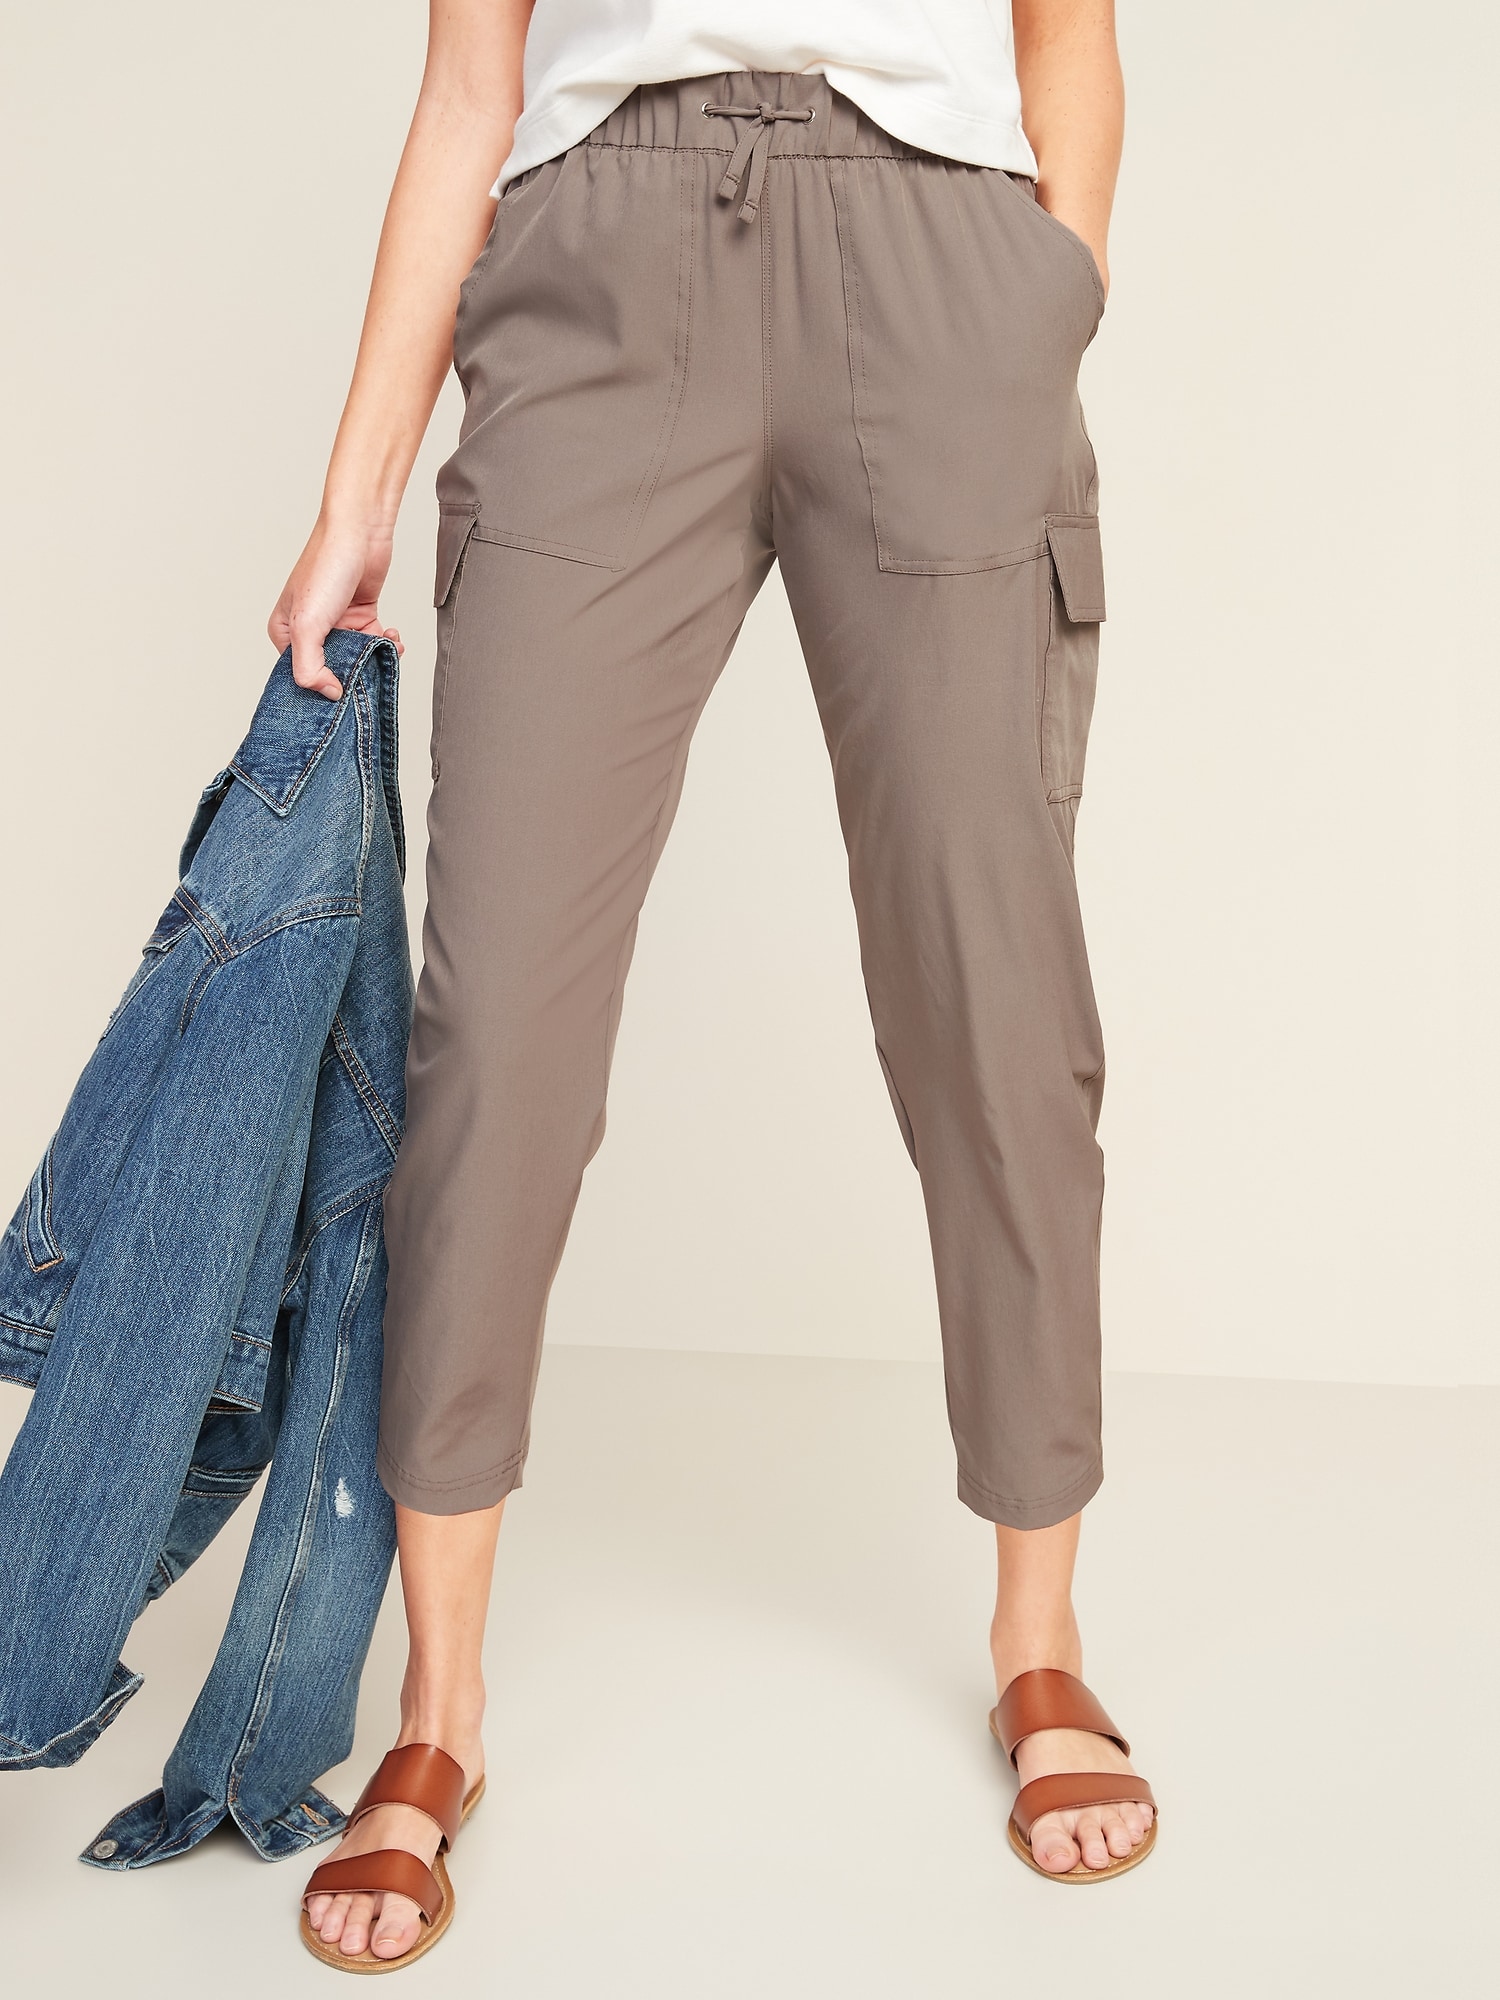 white cargo pants old navy